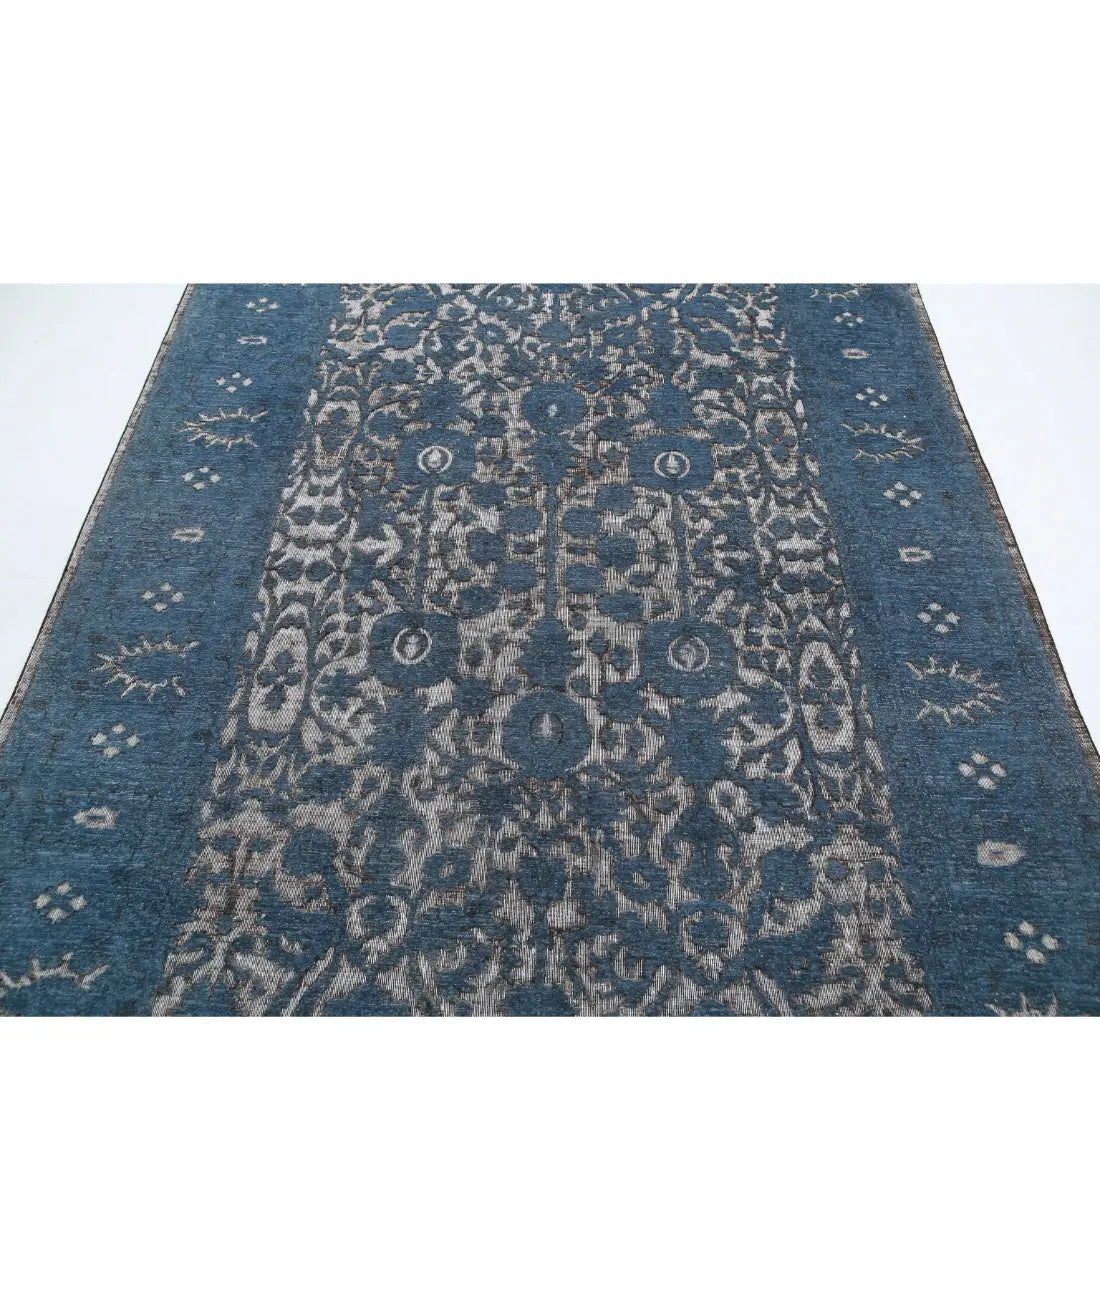 Hand Knotted Onyx Wool Rug - 6'1'' x 8'9''